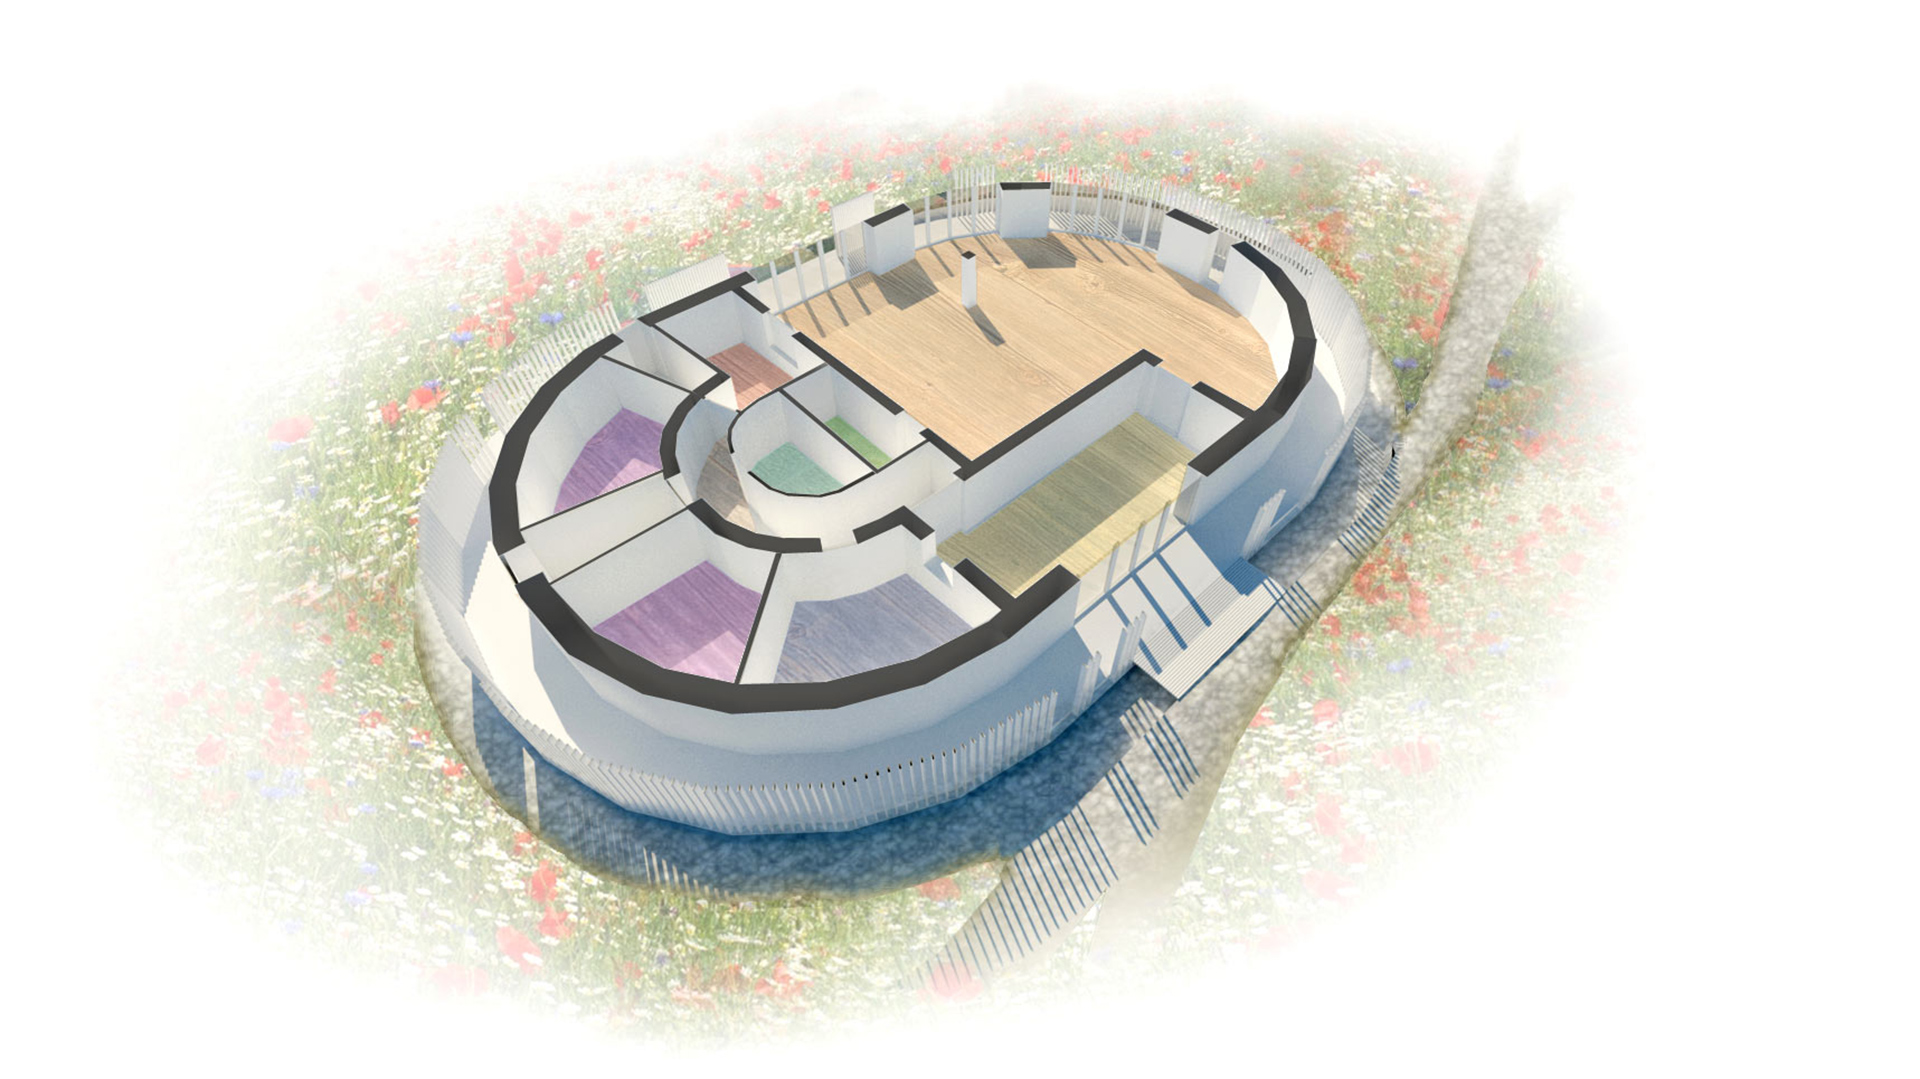 visual axo diagram of oval shaped visitors centre